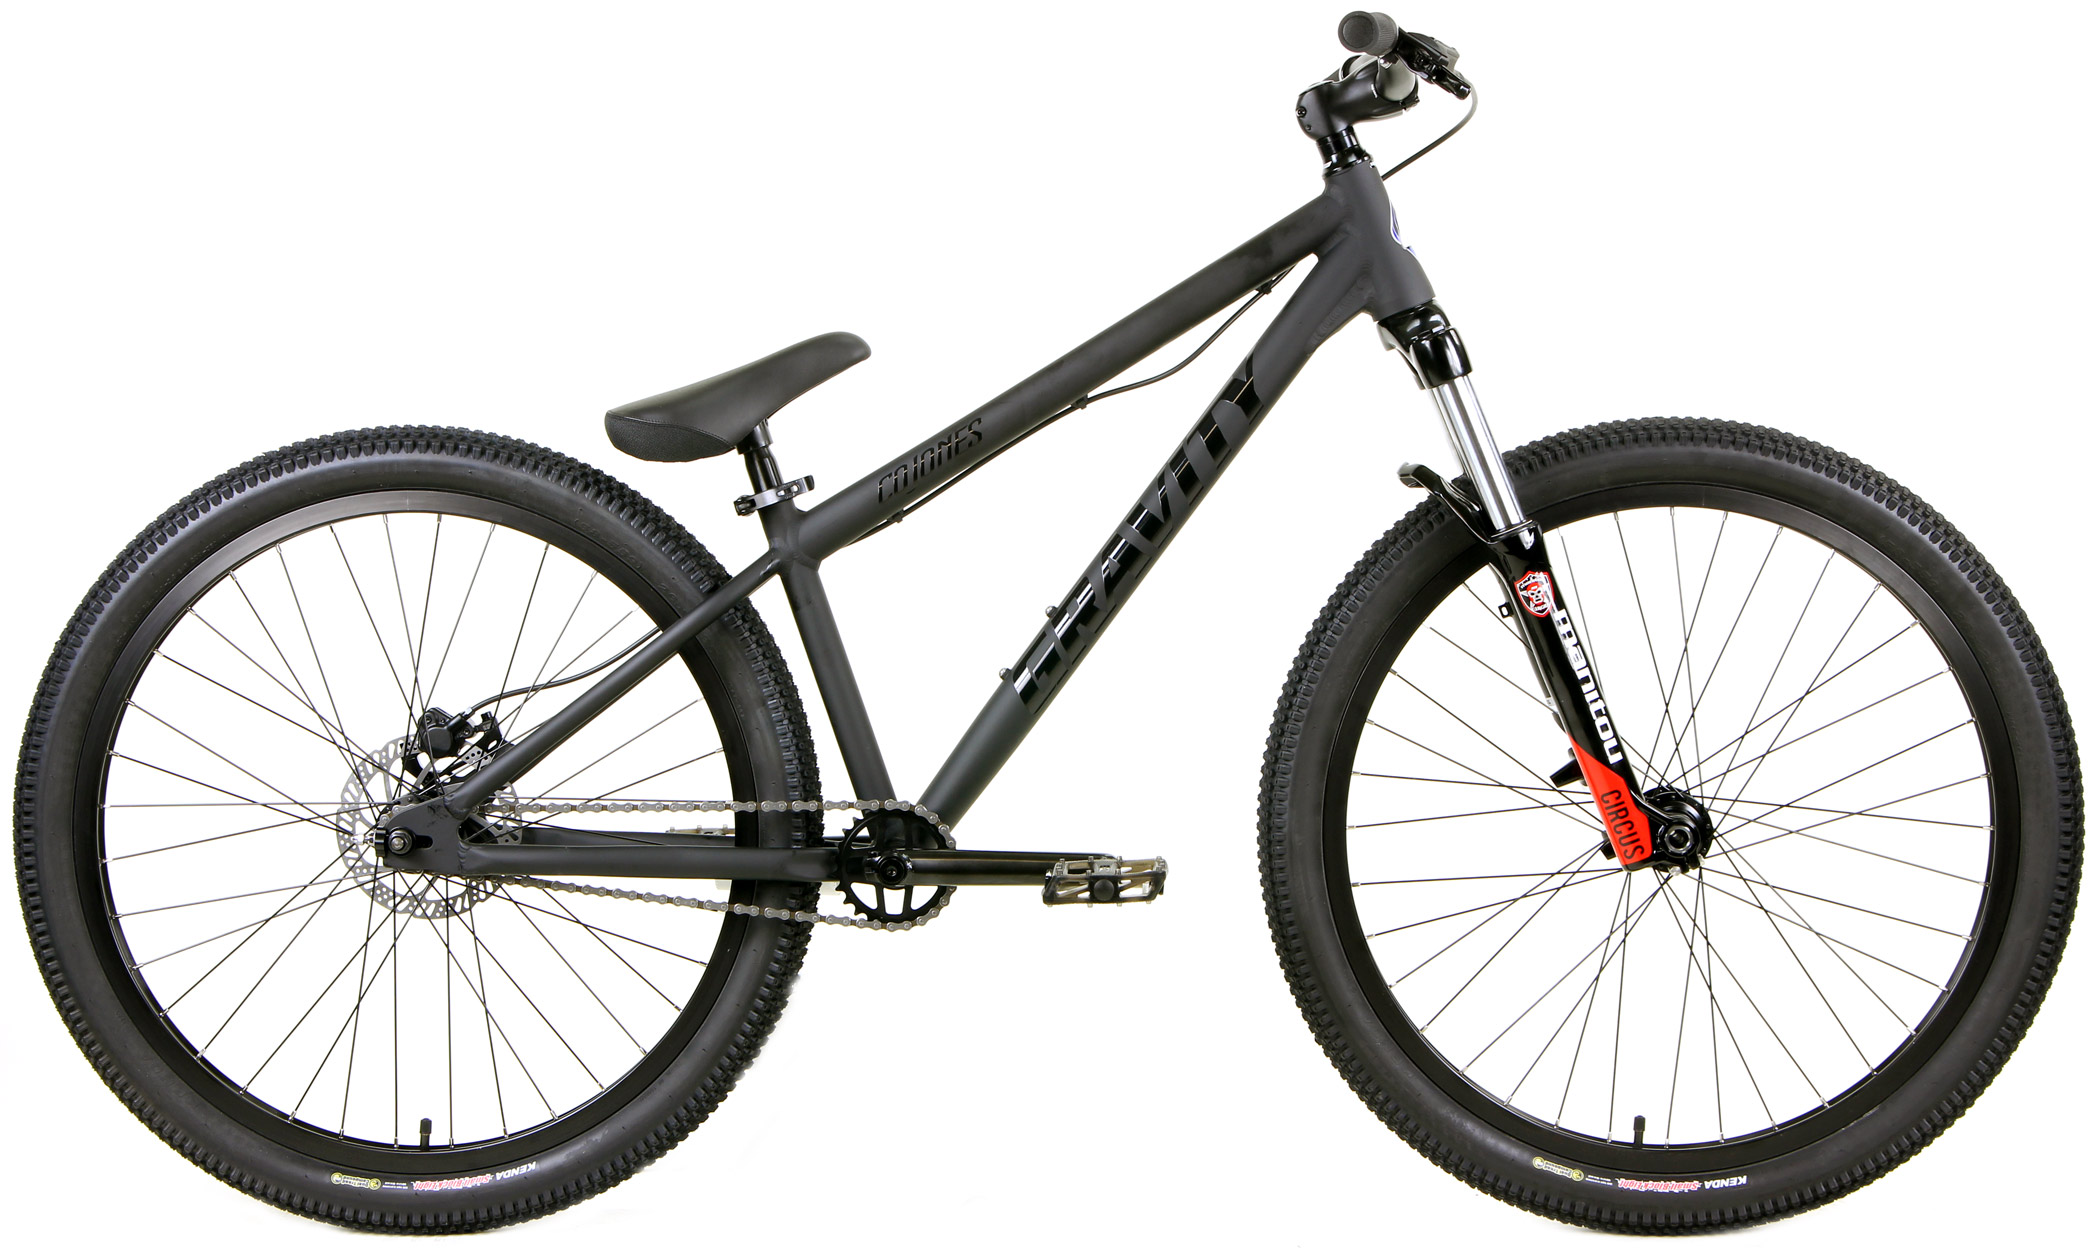 Save up to 60% new Adult BMX ALL BIKES FREE SHIP 48 Save Up to 60% Off Gravity CoJones FLY Bicycles Dirt Jump Dirt Jump Bikes, BMX Cruiser Bikes